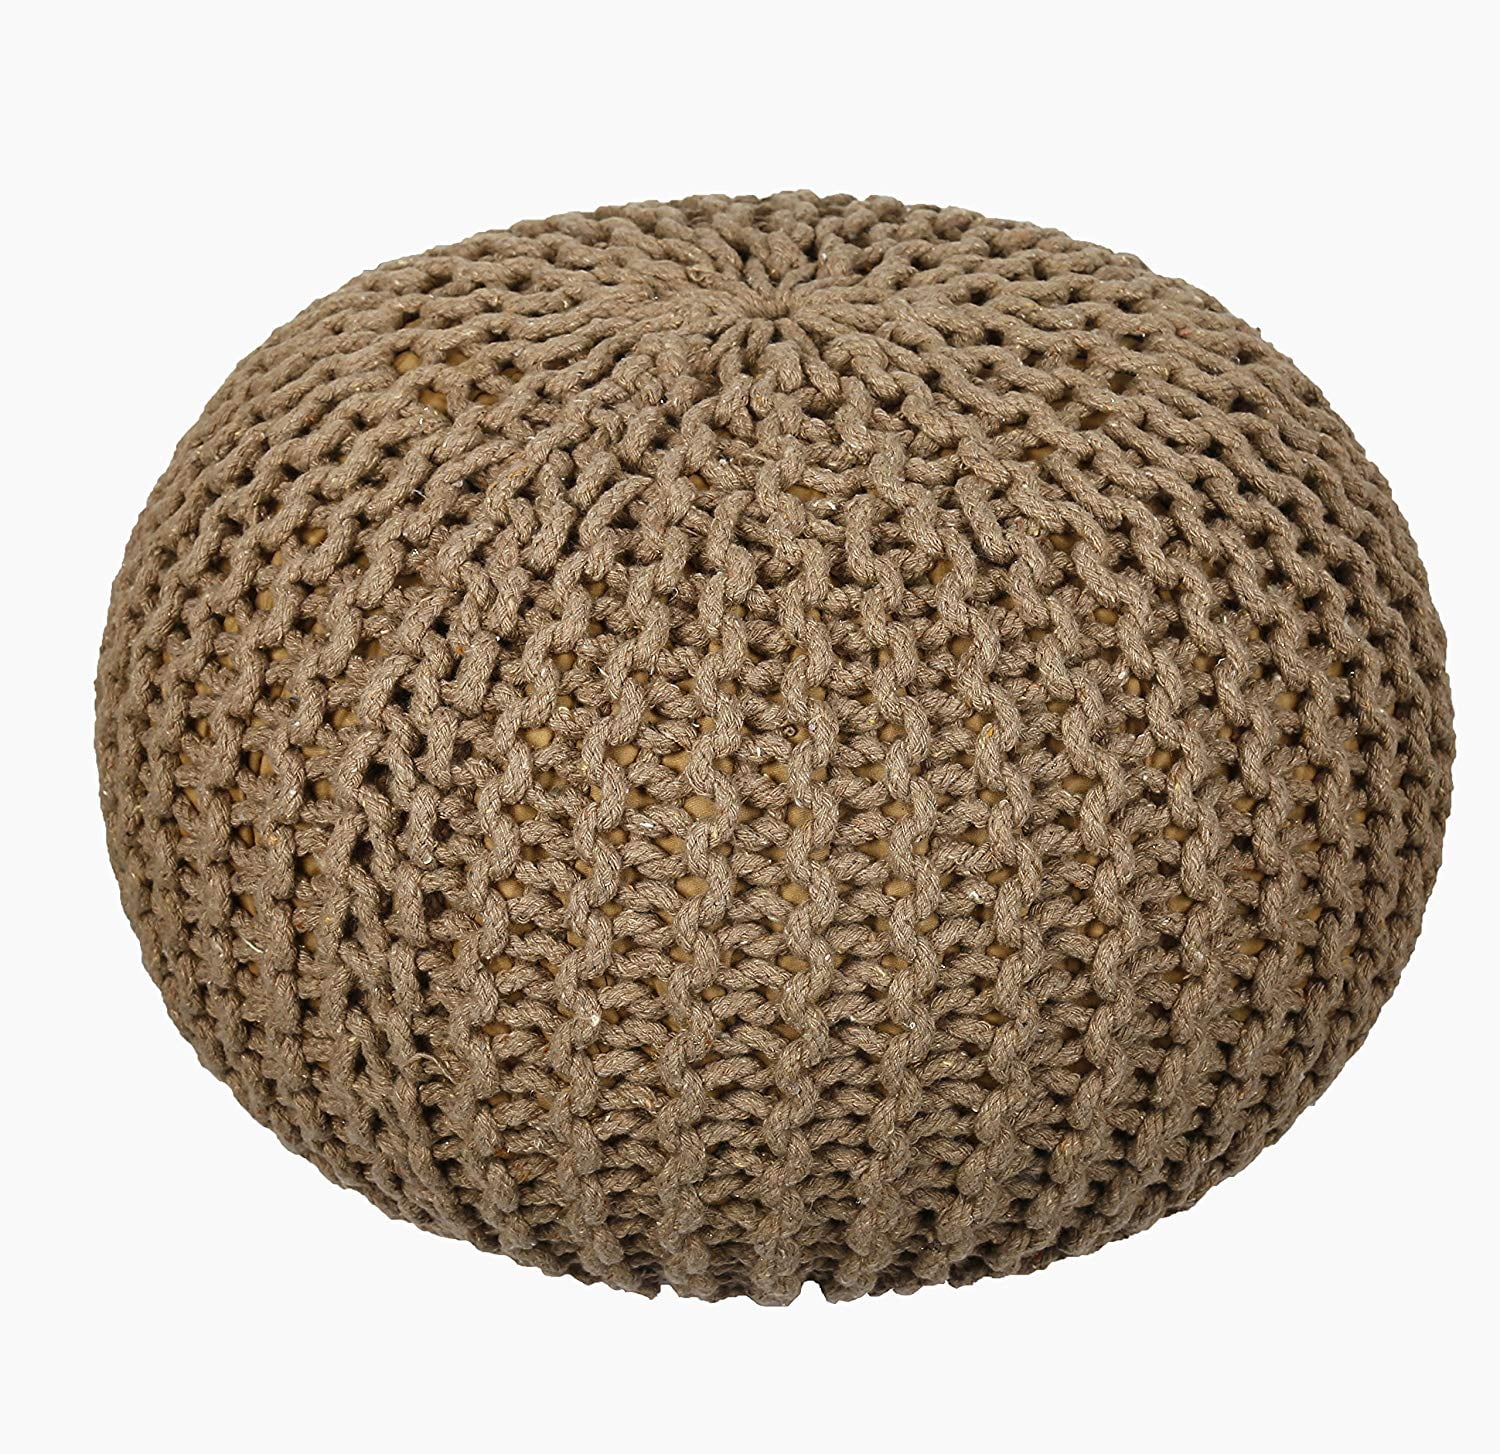 Large Chunky Knitted 100% Cotton Round Pouffe Handmade Foot Stool Ottoman 